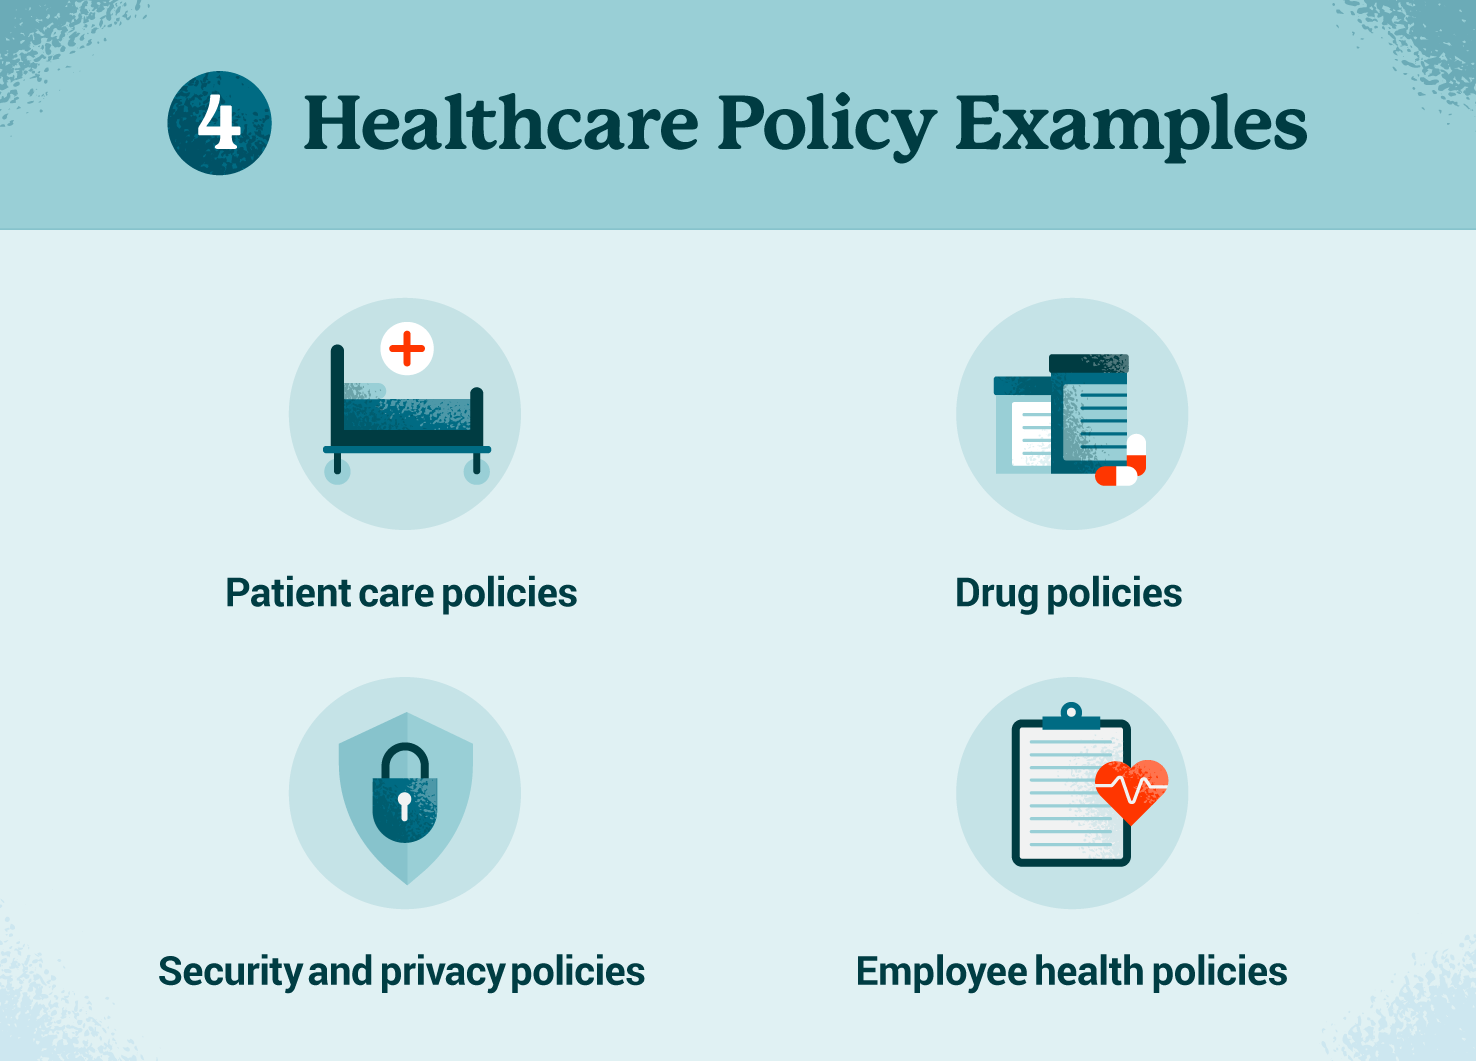 Healthcare policy examples graphic